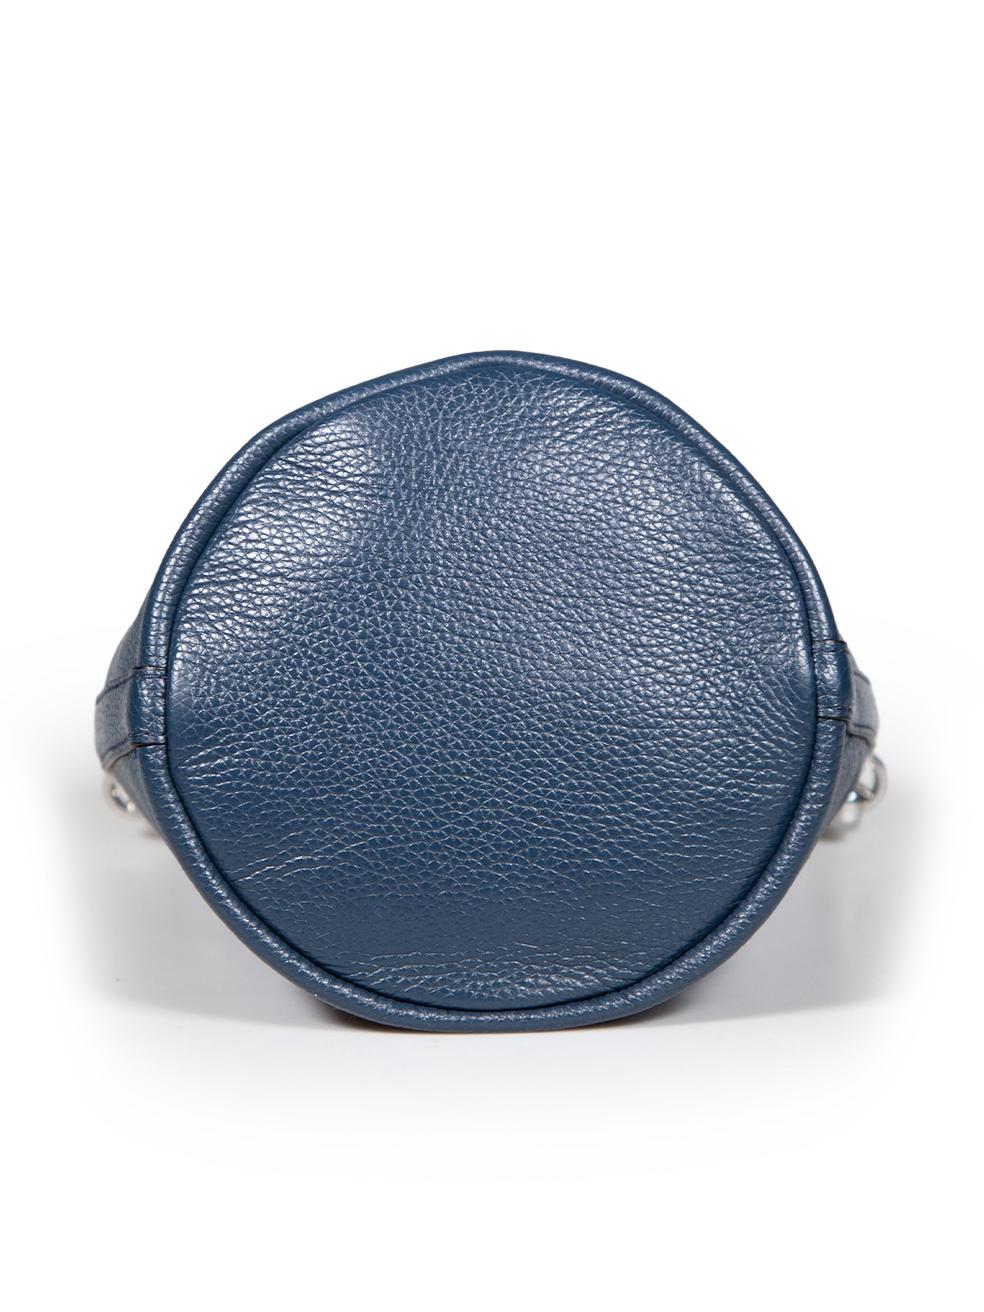 Women's Marc Jacobs Blue Leather 'The Bucket' Bag For Sale